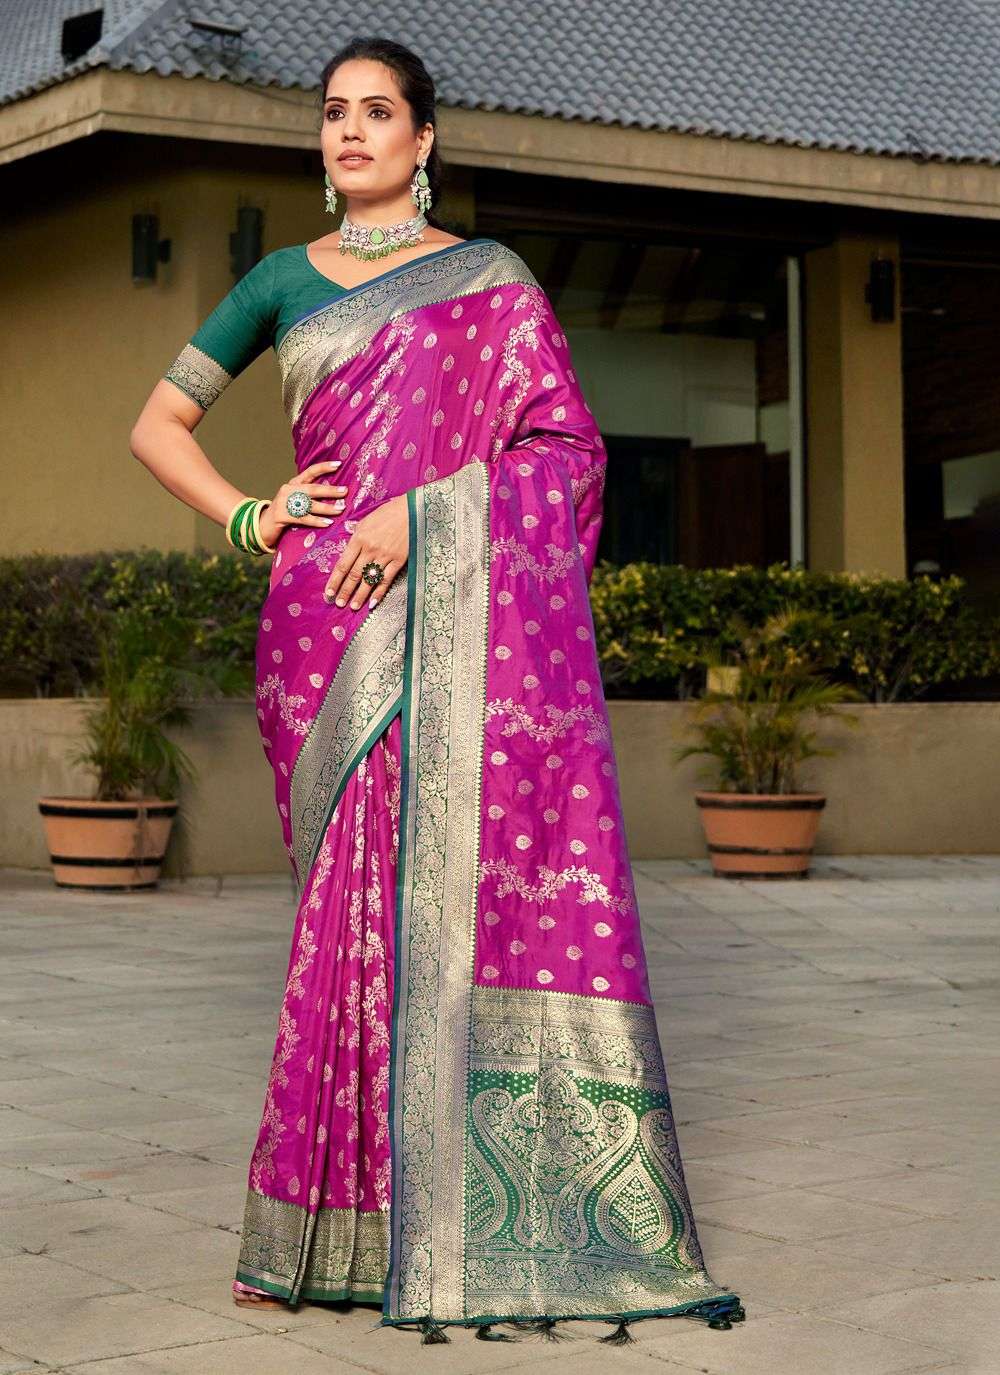 Saree Dresses- A Trend That You Have To Be A Part Of